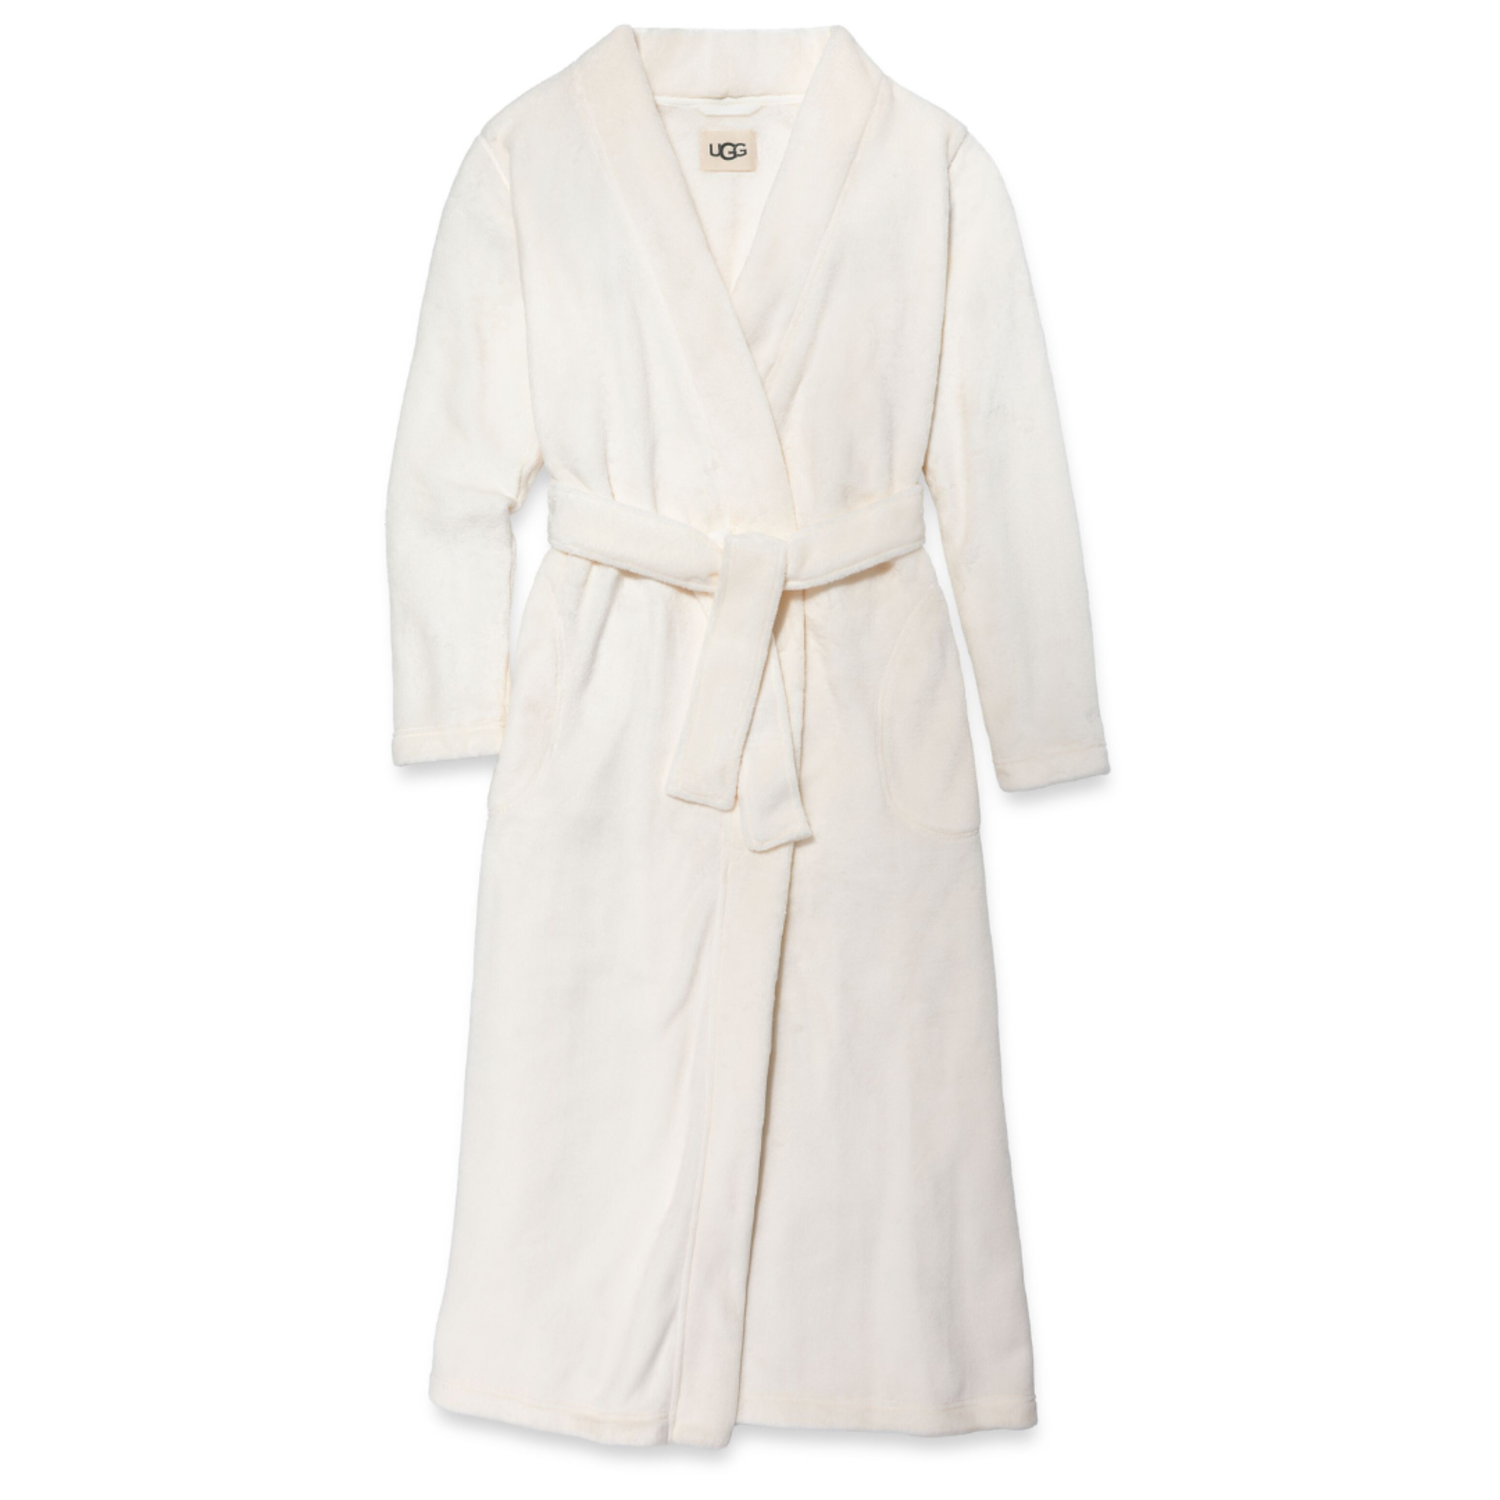 The Marlow Robe